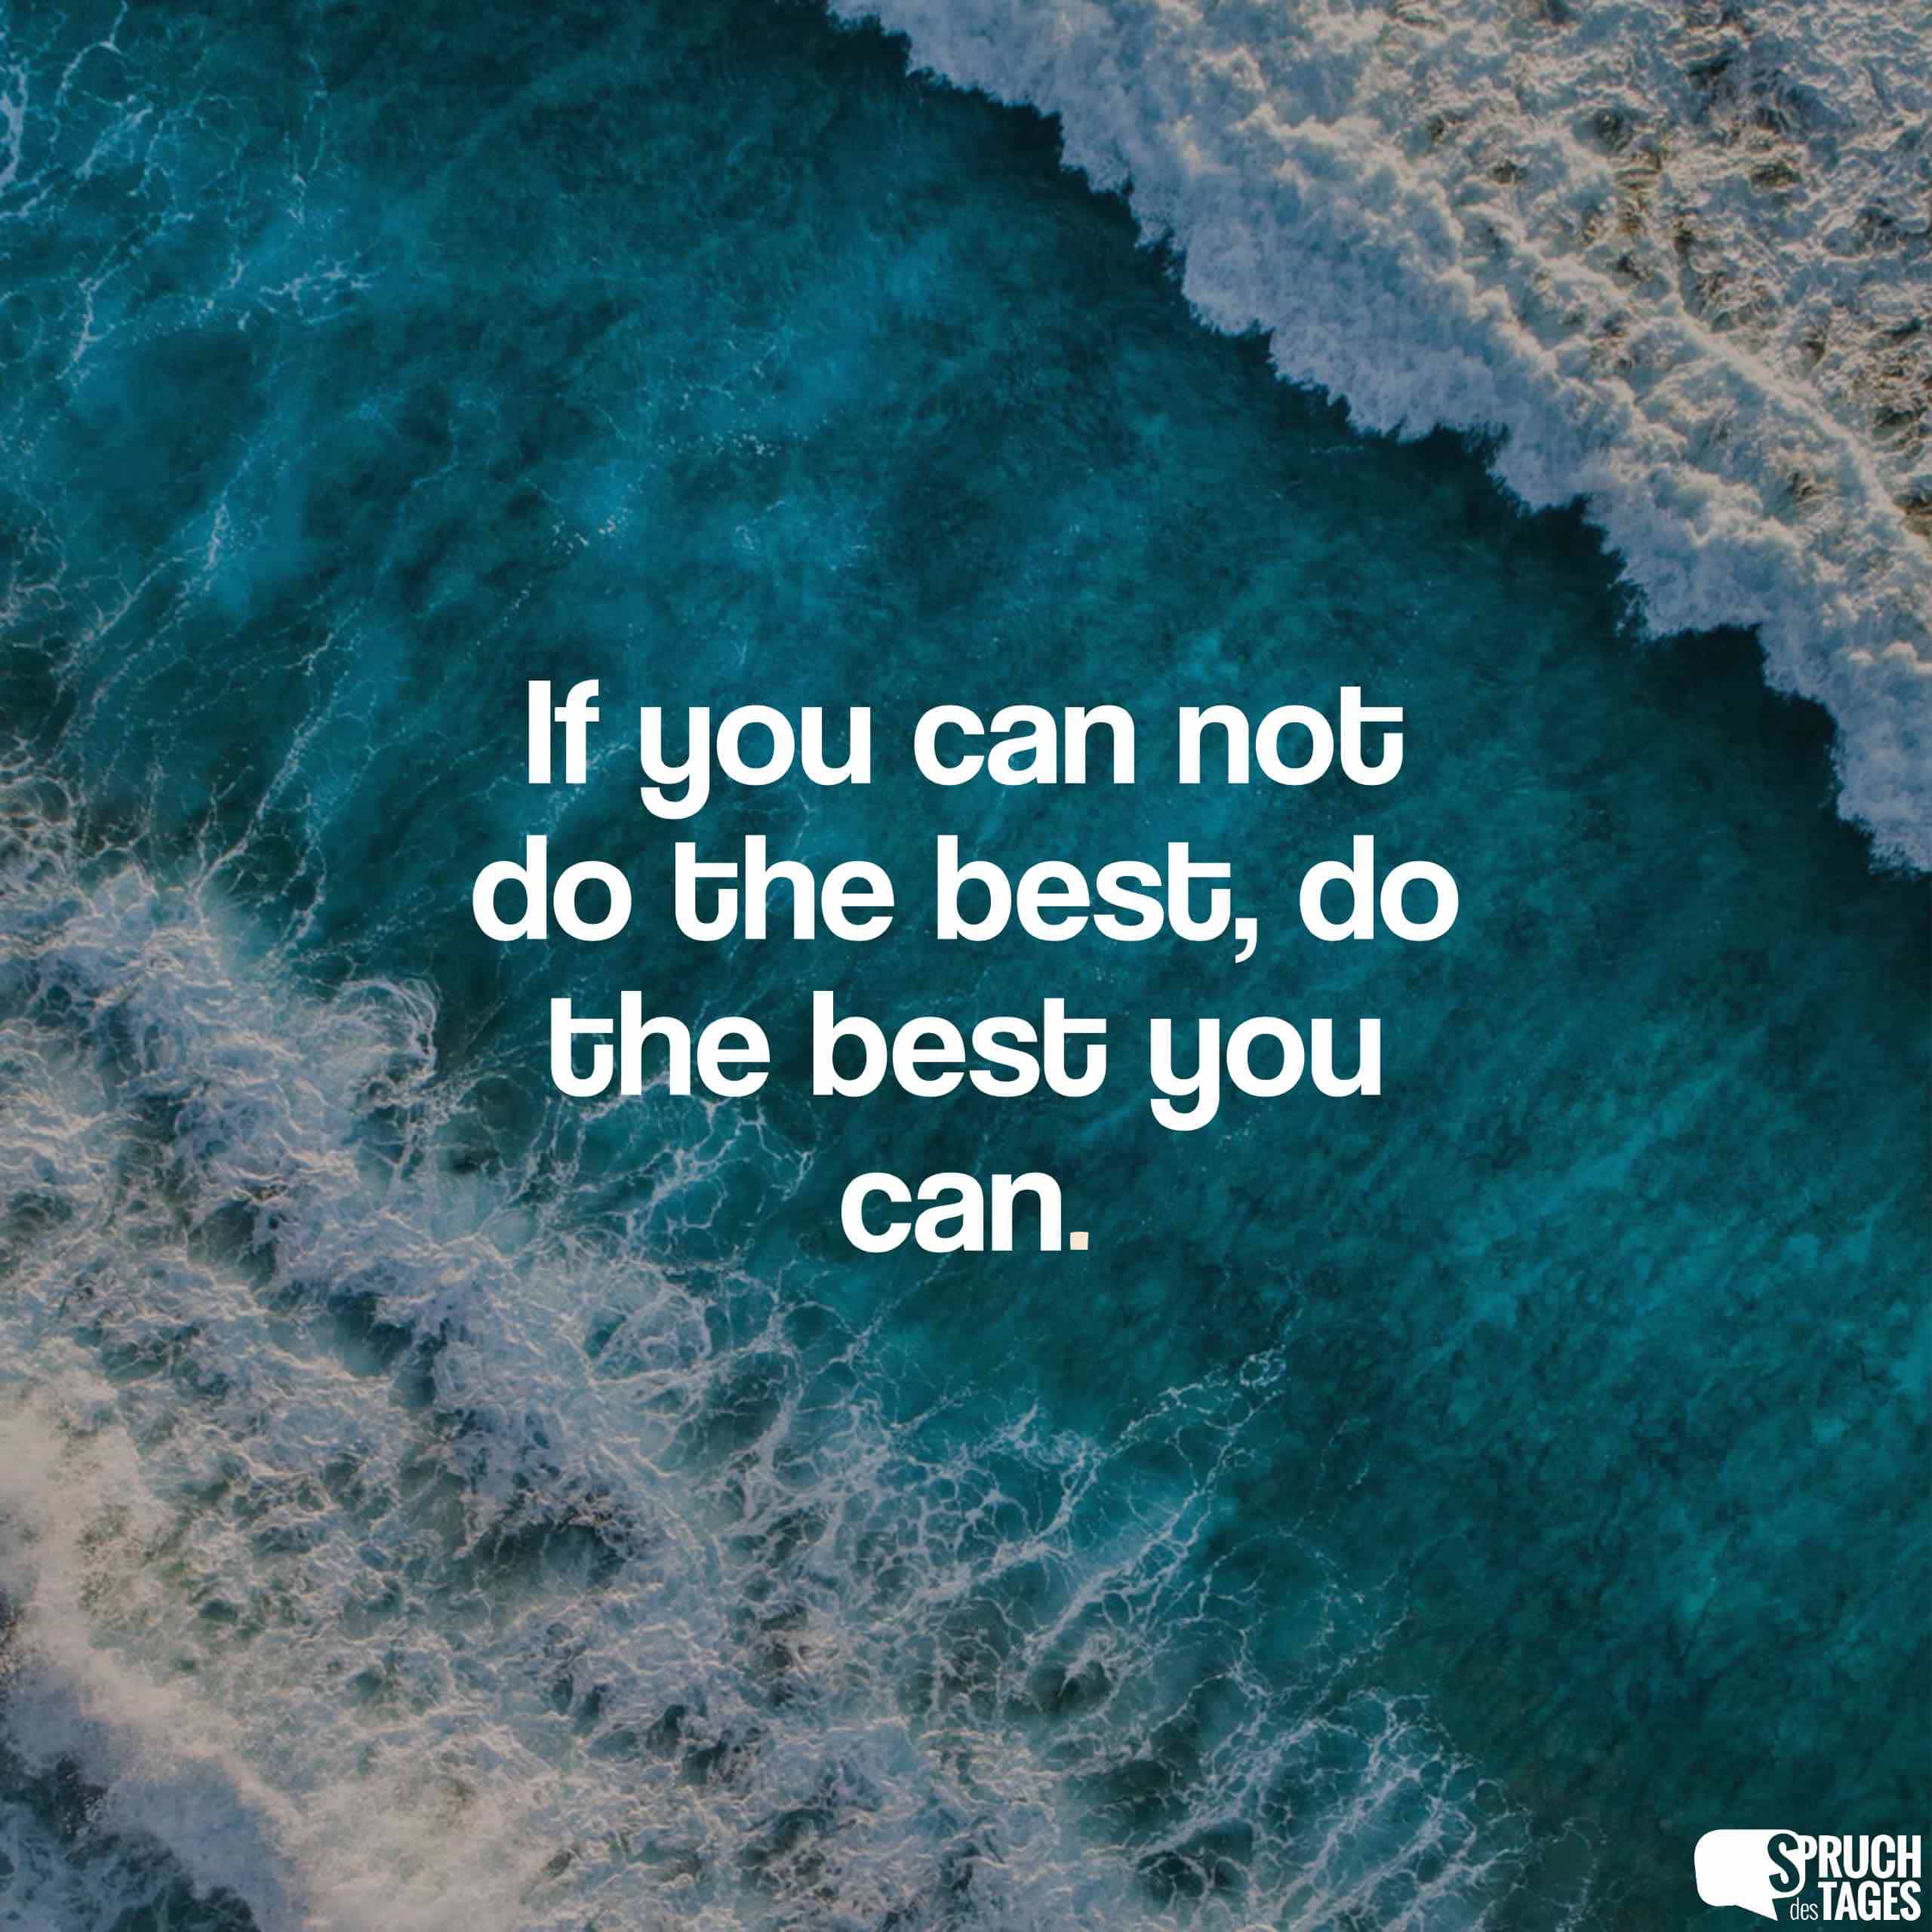 If you can not do the best, do the best you can.